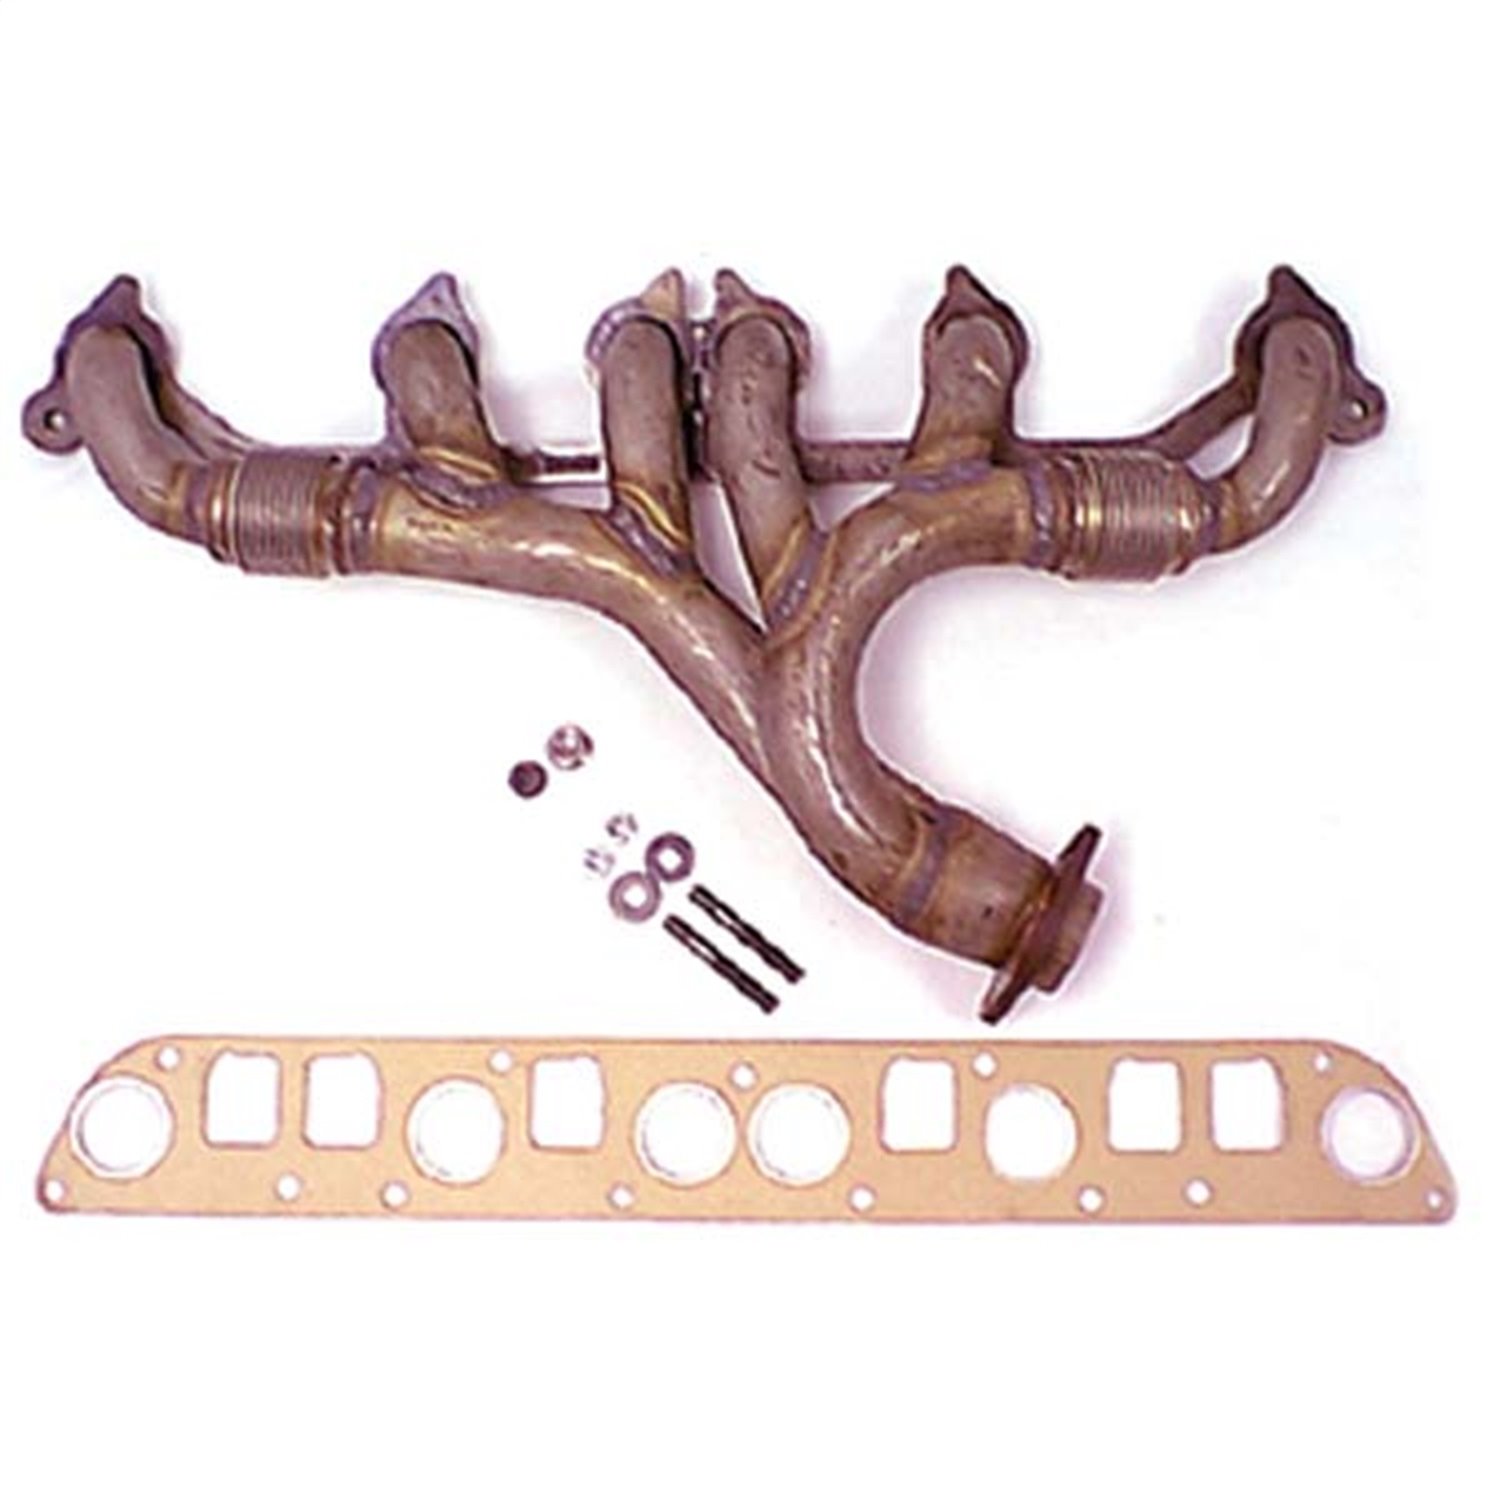 This exhaust manifold kit from Omix-ADA fits 91-99